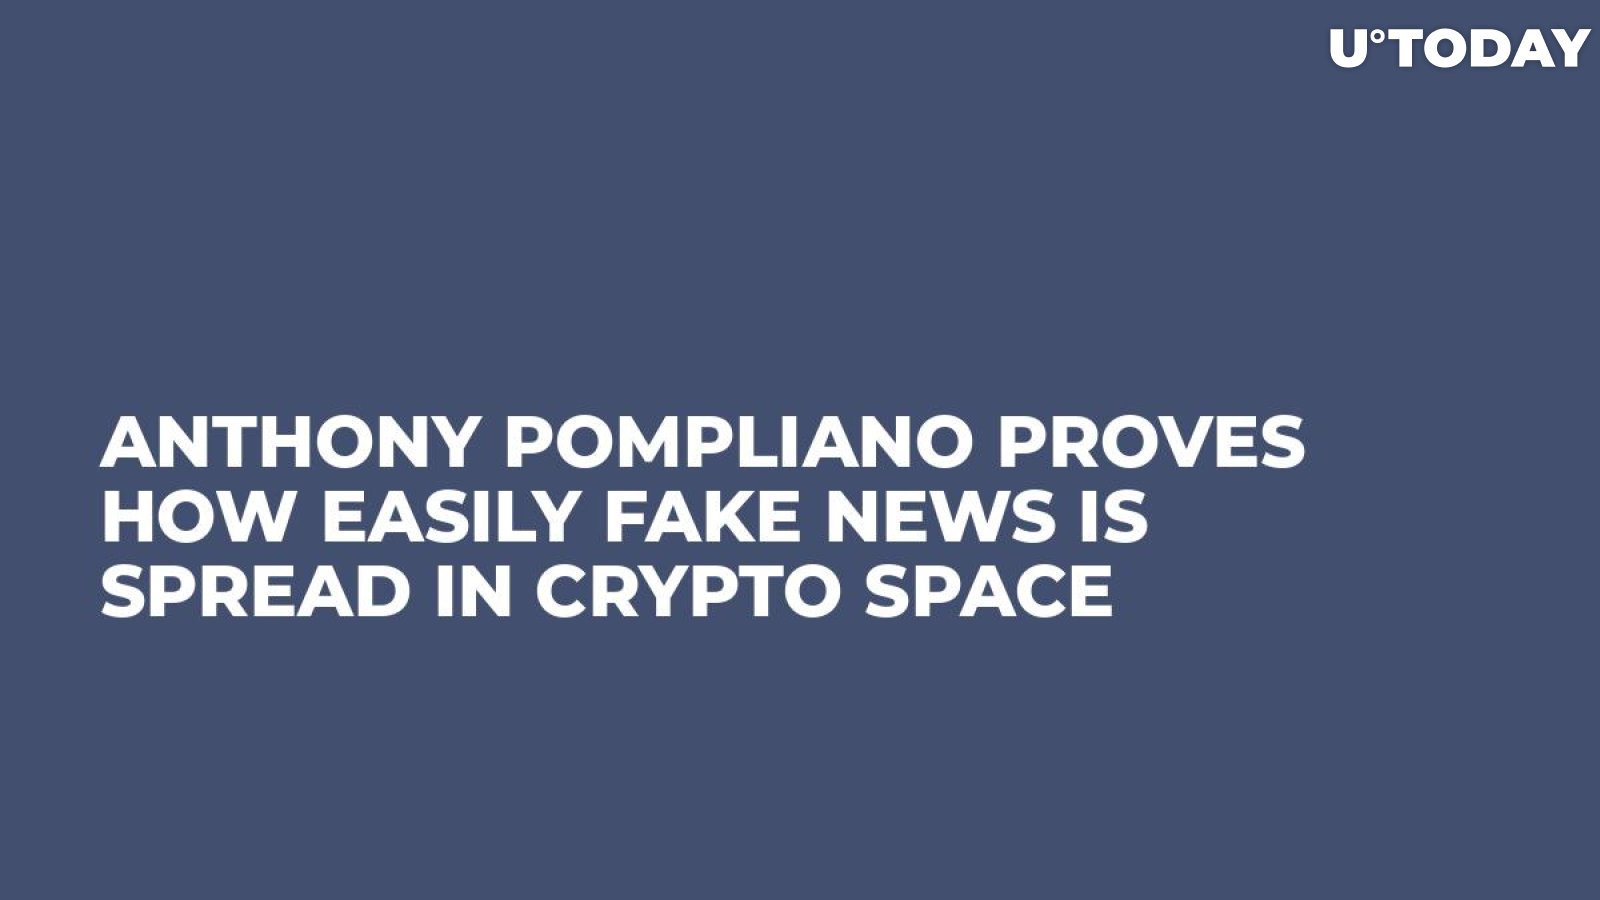 Anthony Pompliano Proves How Easily Fake News Is Spread in Crypto Space